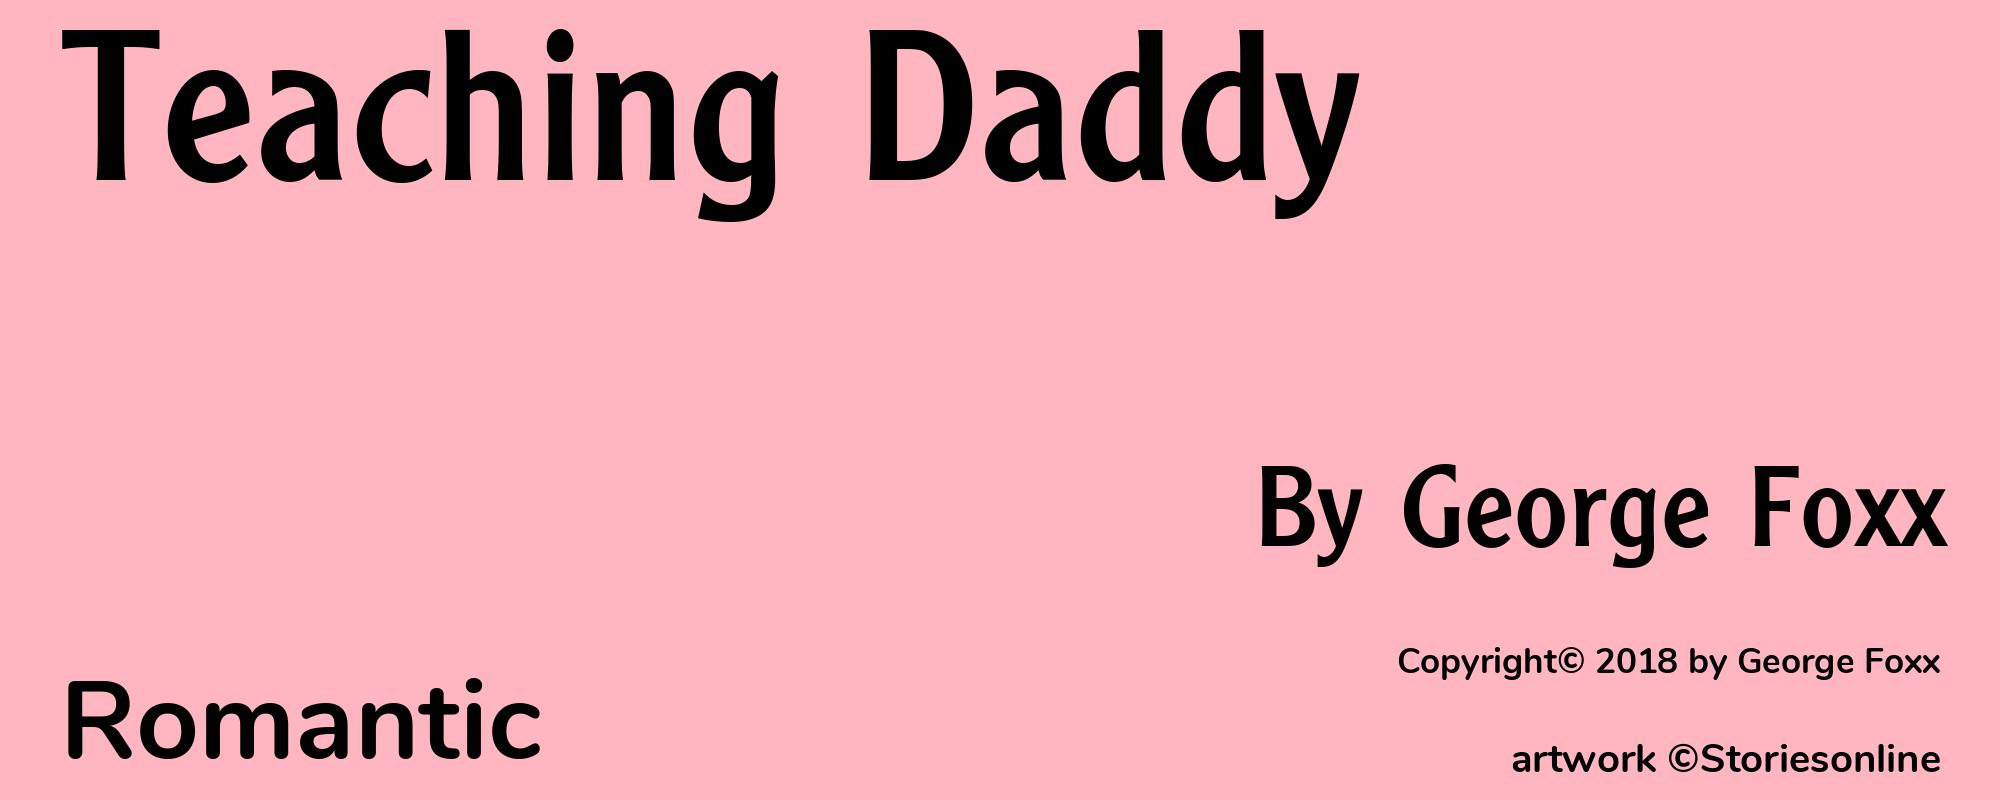 Teaching Daddy - Cover